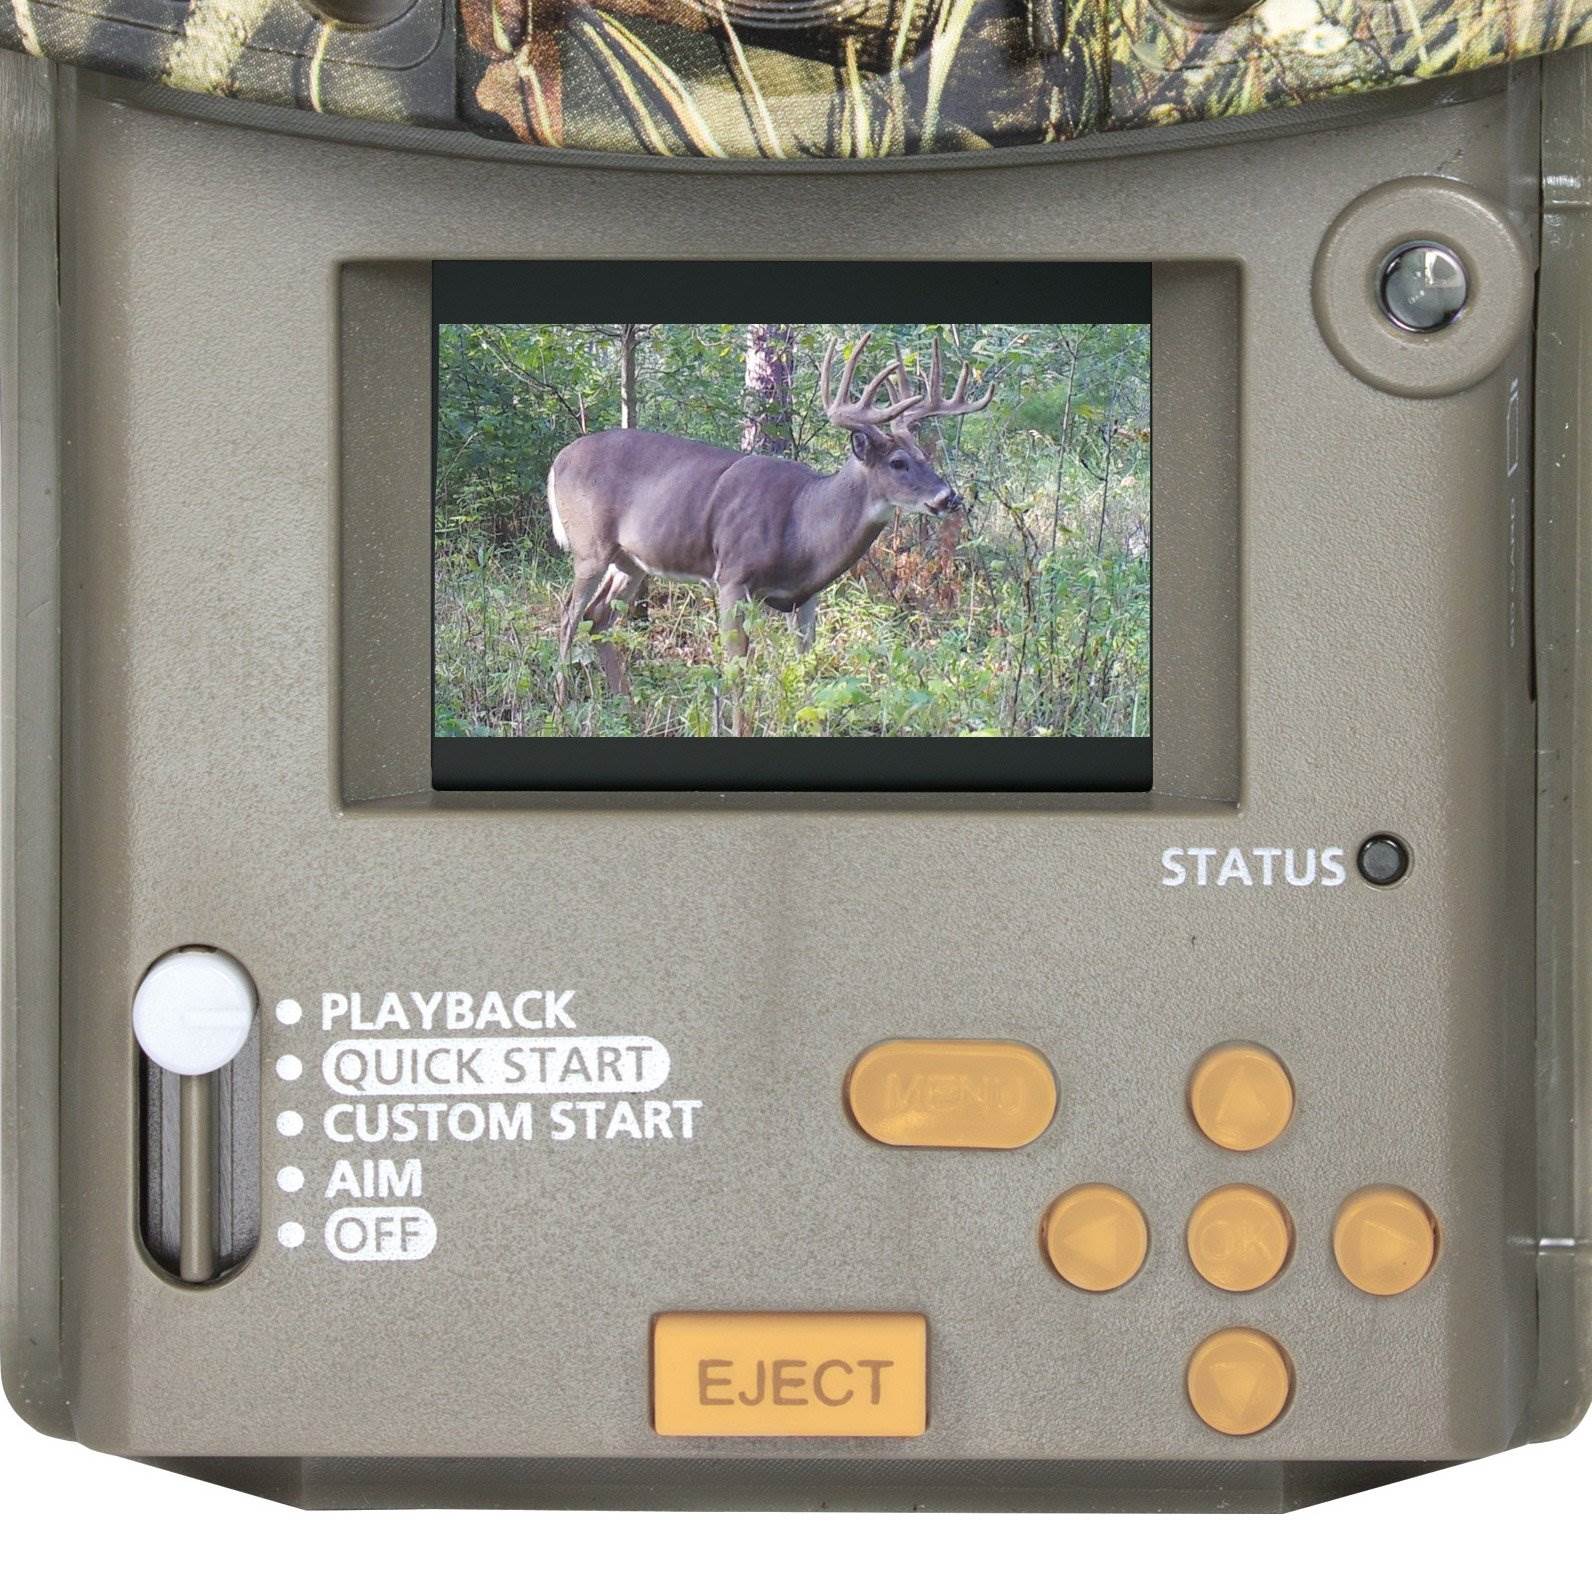 Moultrie M-999i 20 Mega Pixel Game Camera, Mossy Oak Country - image 5 of 5